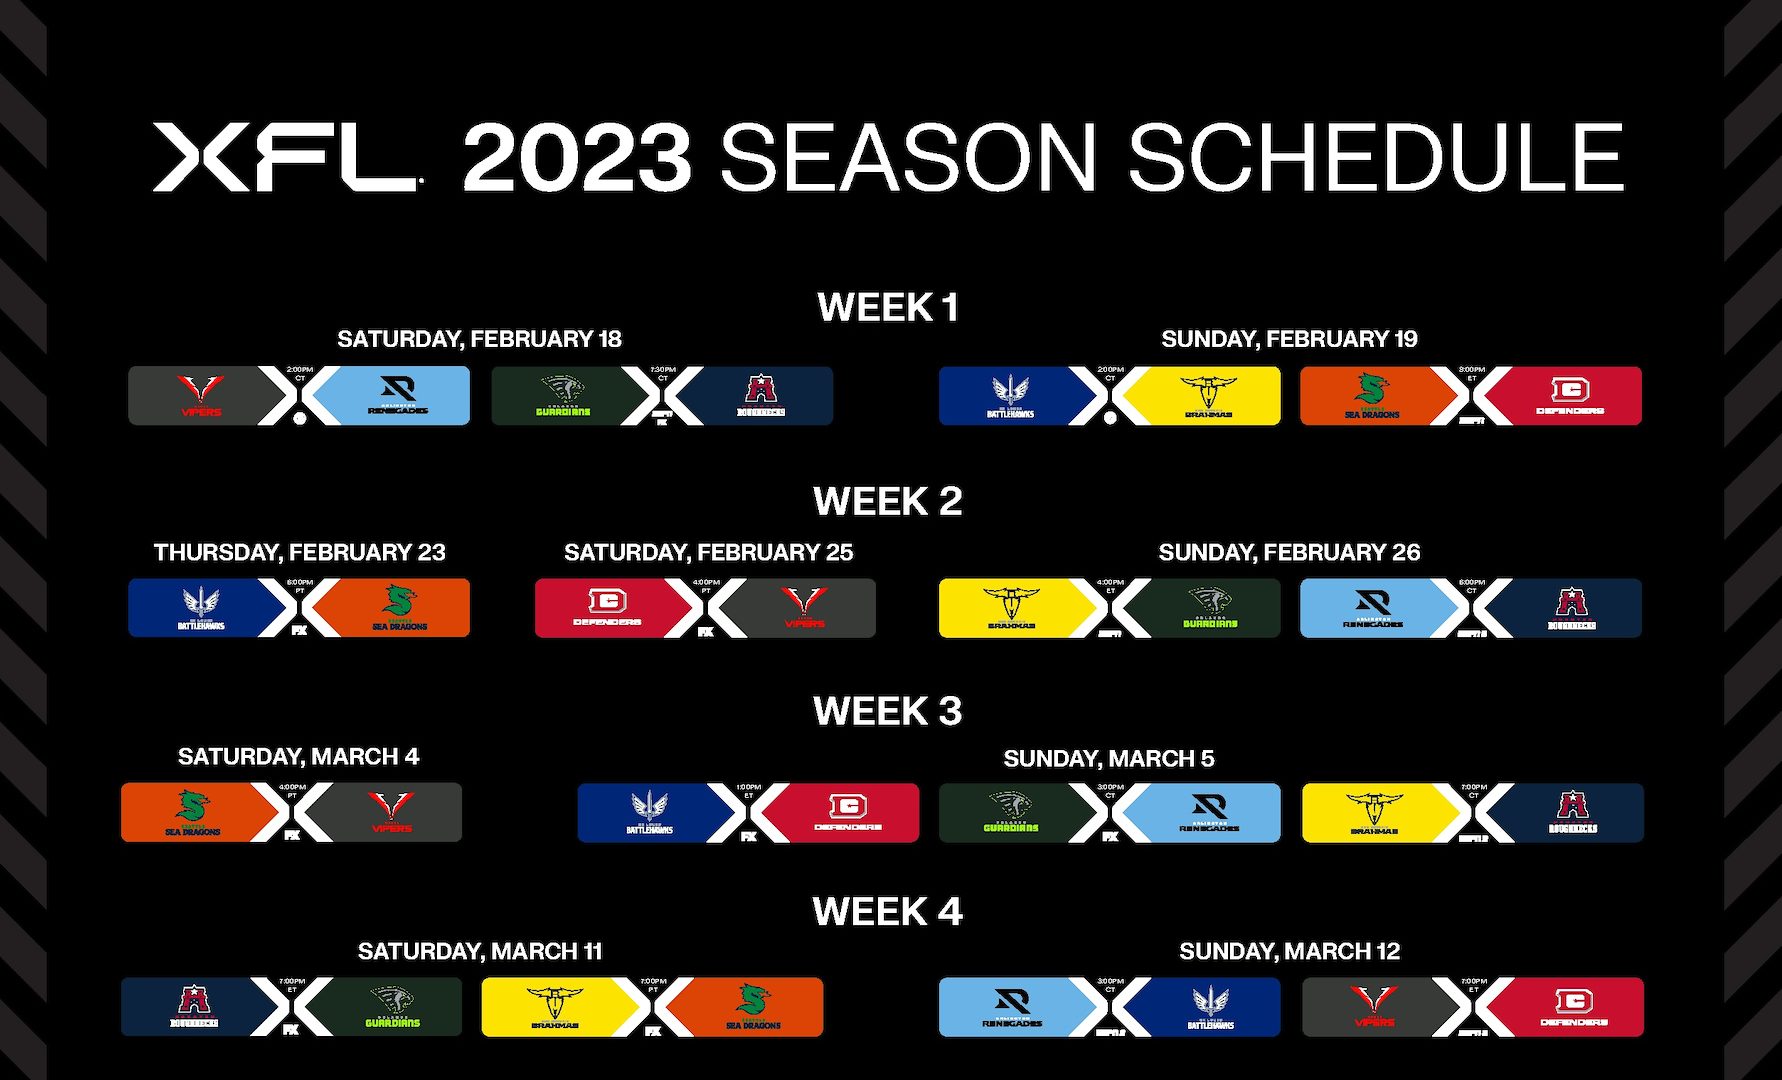 Quirks oddities and other things I noticed about the XFL schedule